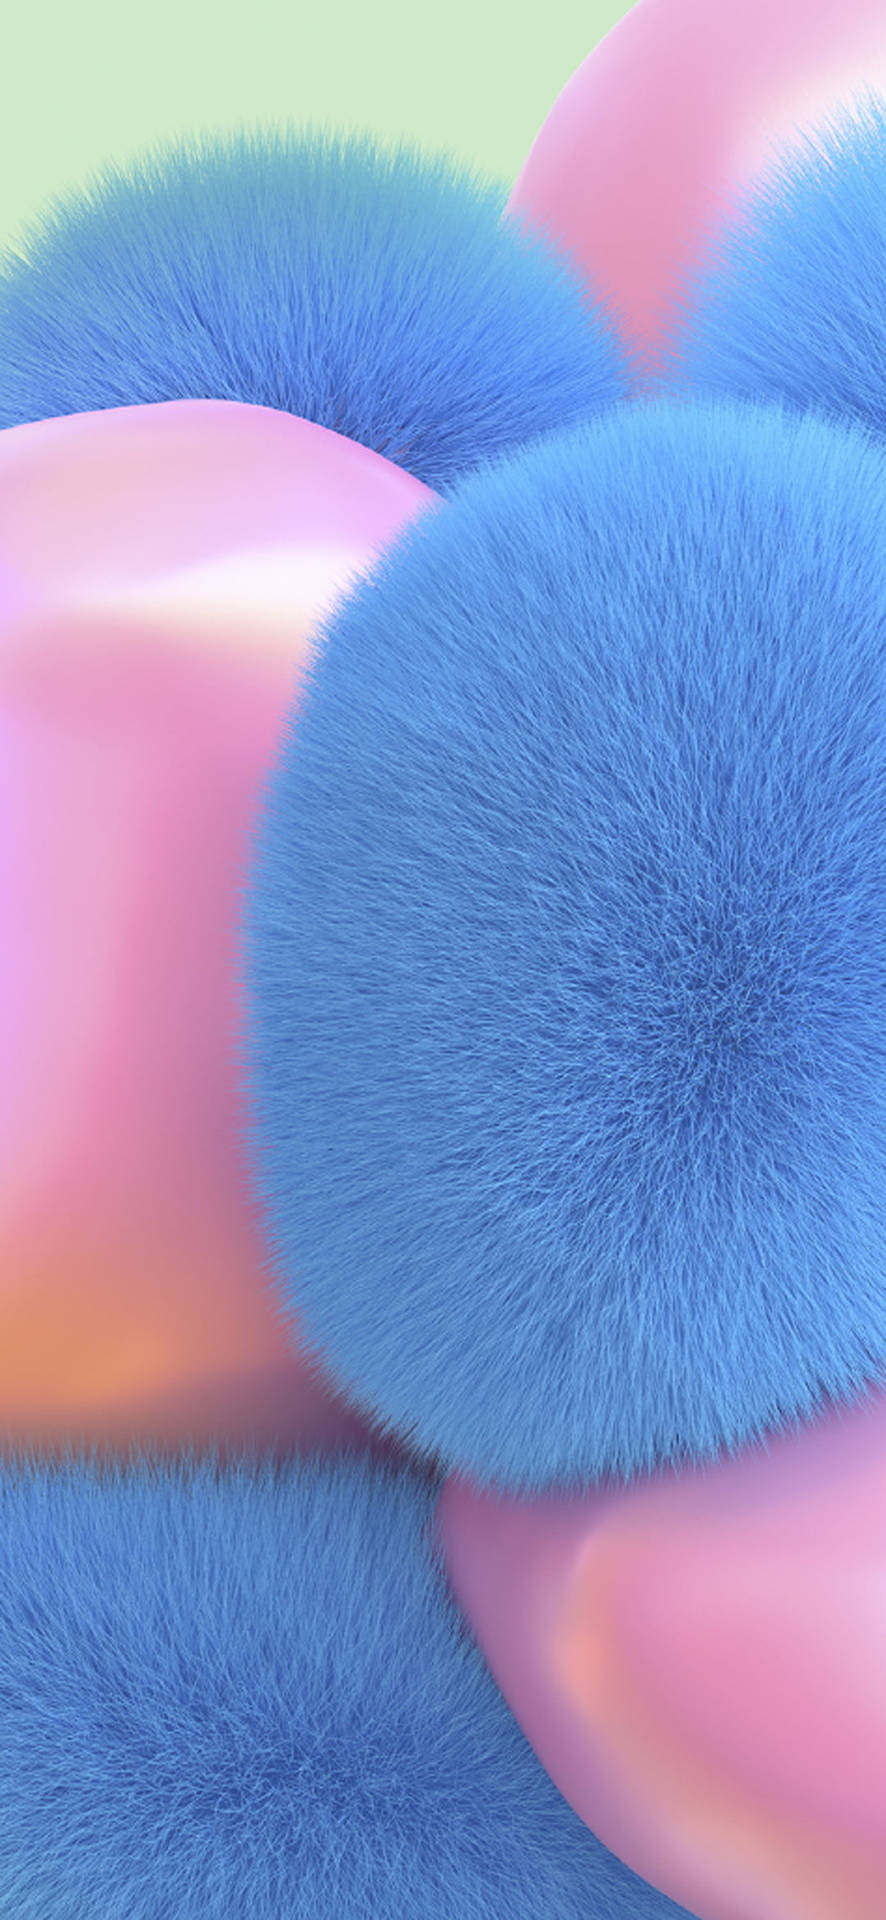 Soft And Fuzzy Balls On Samsung Full Hd